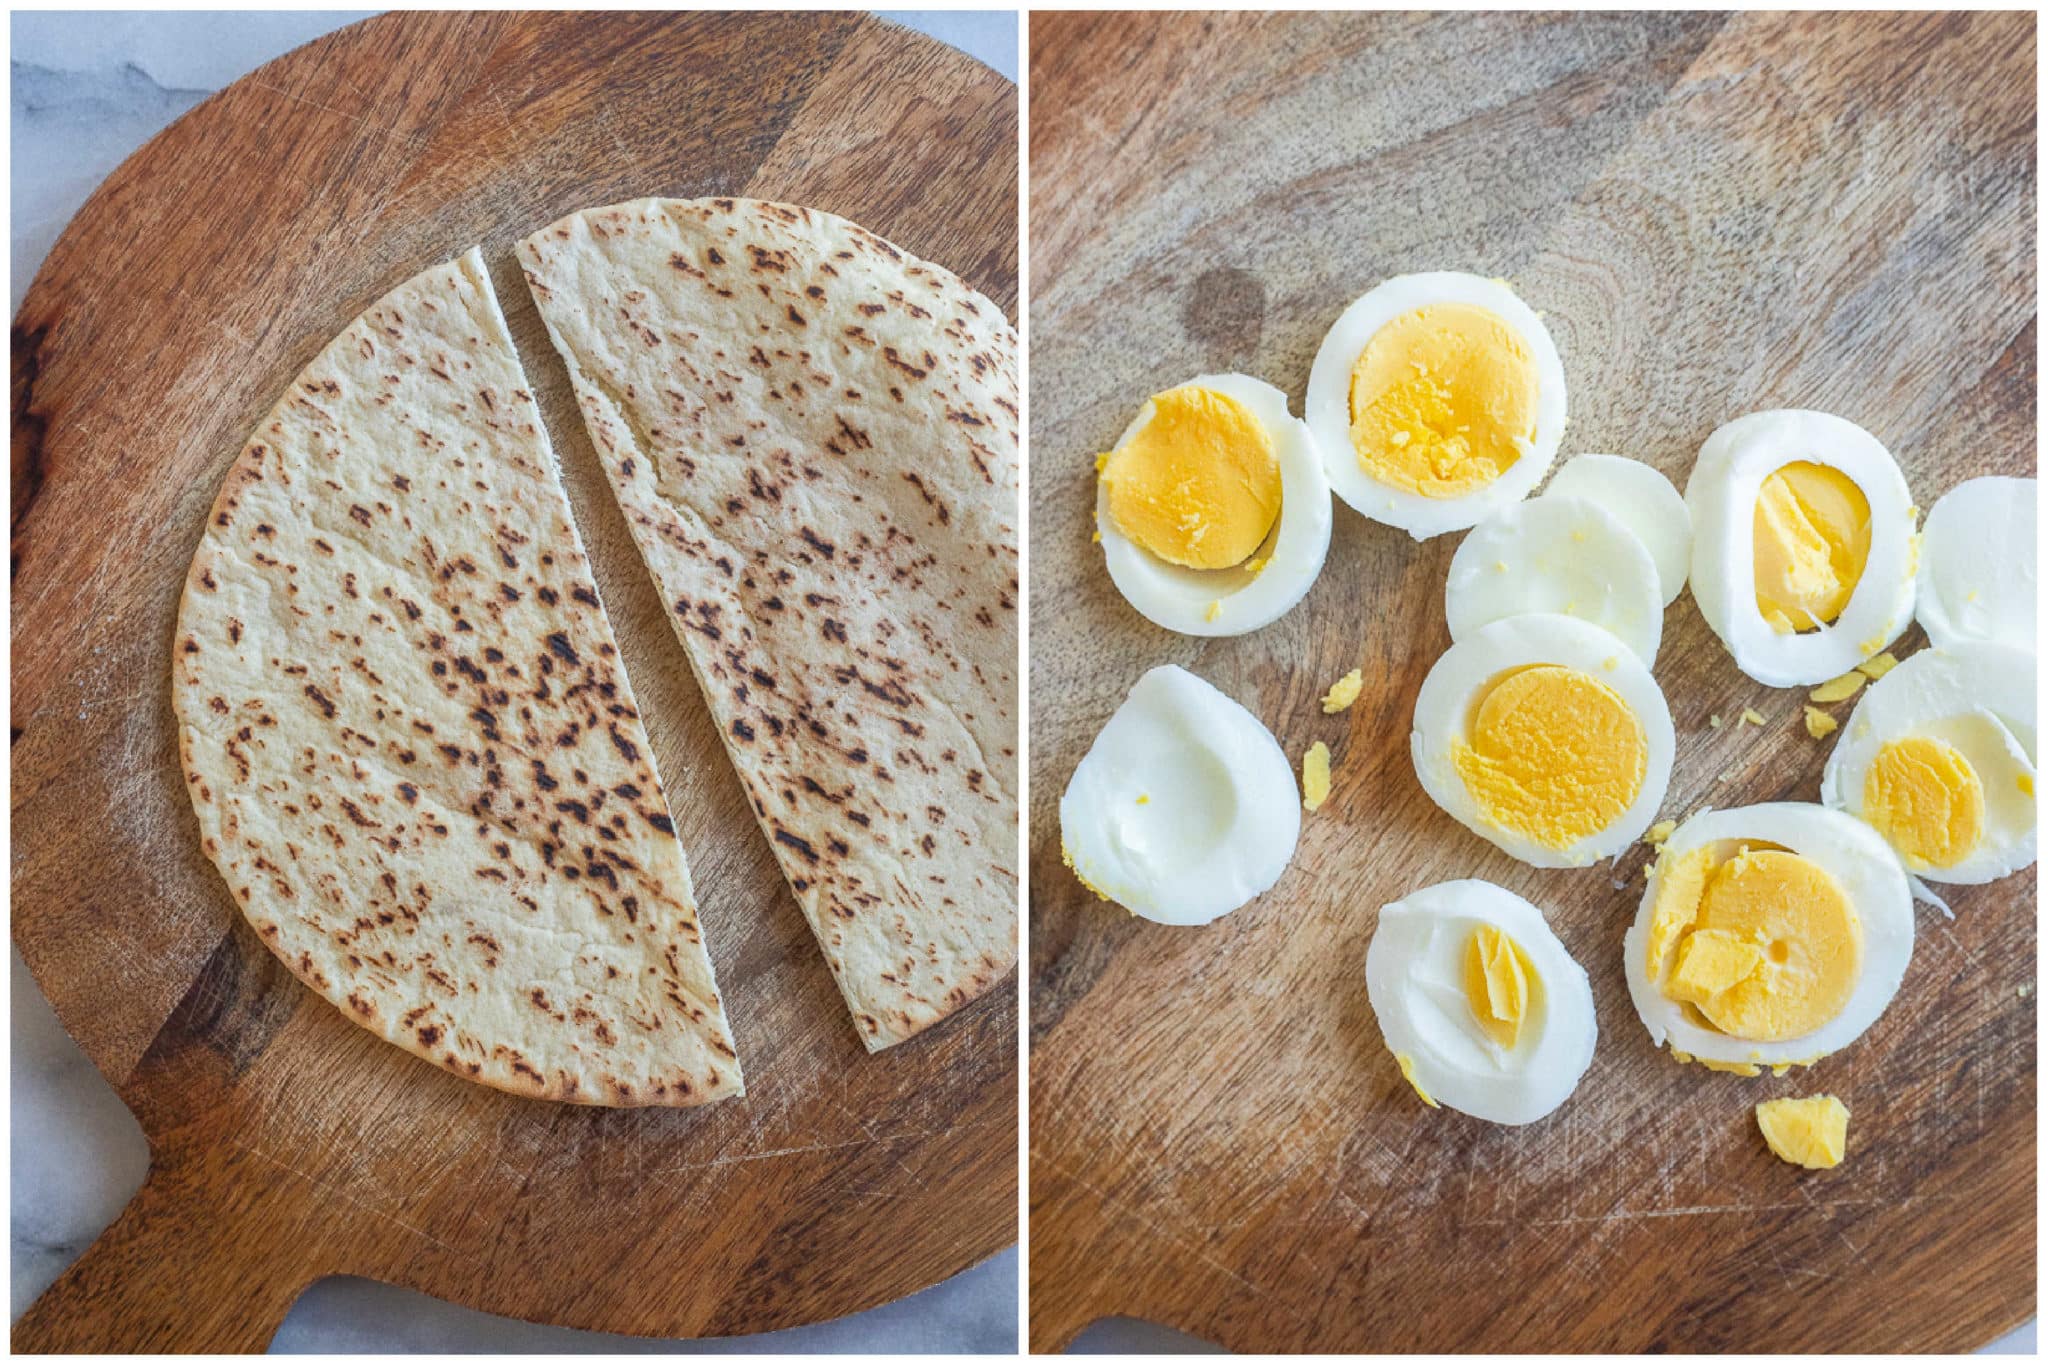 pita bread sliced in half and hard boiled eggs sliced into pieces